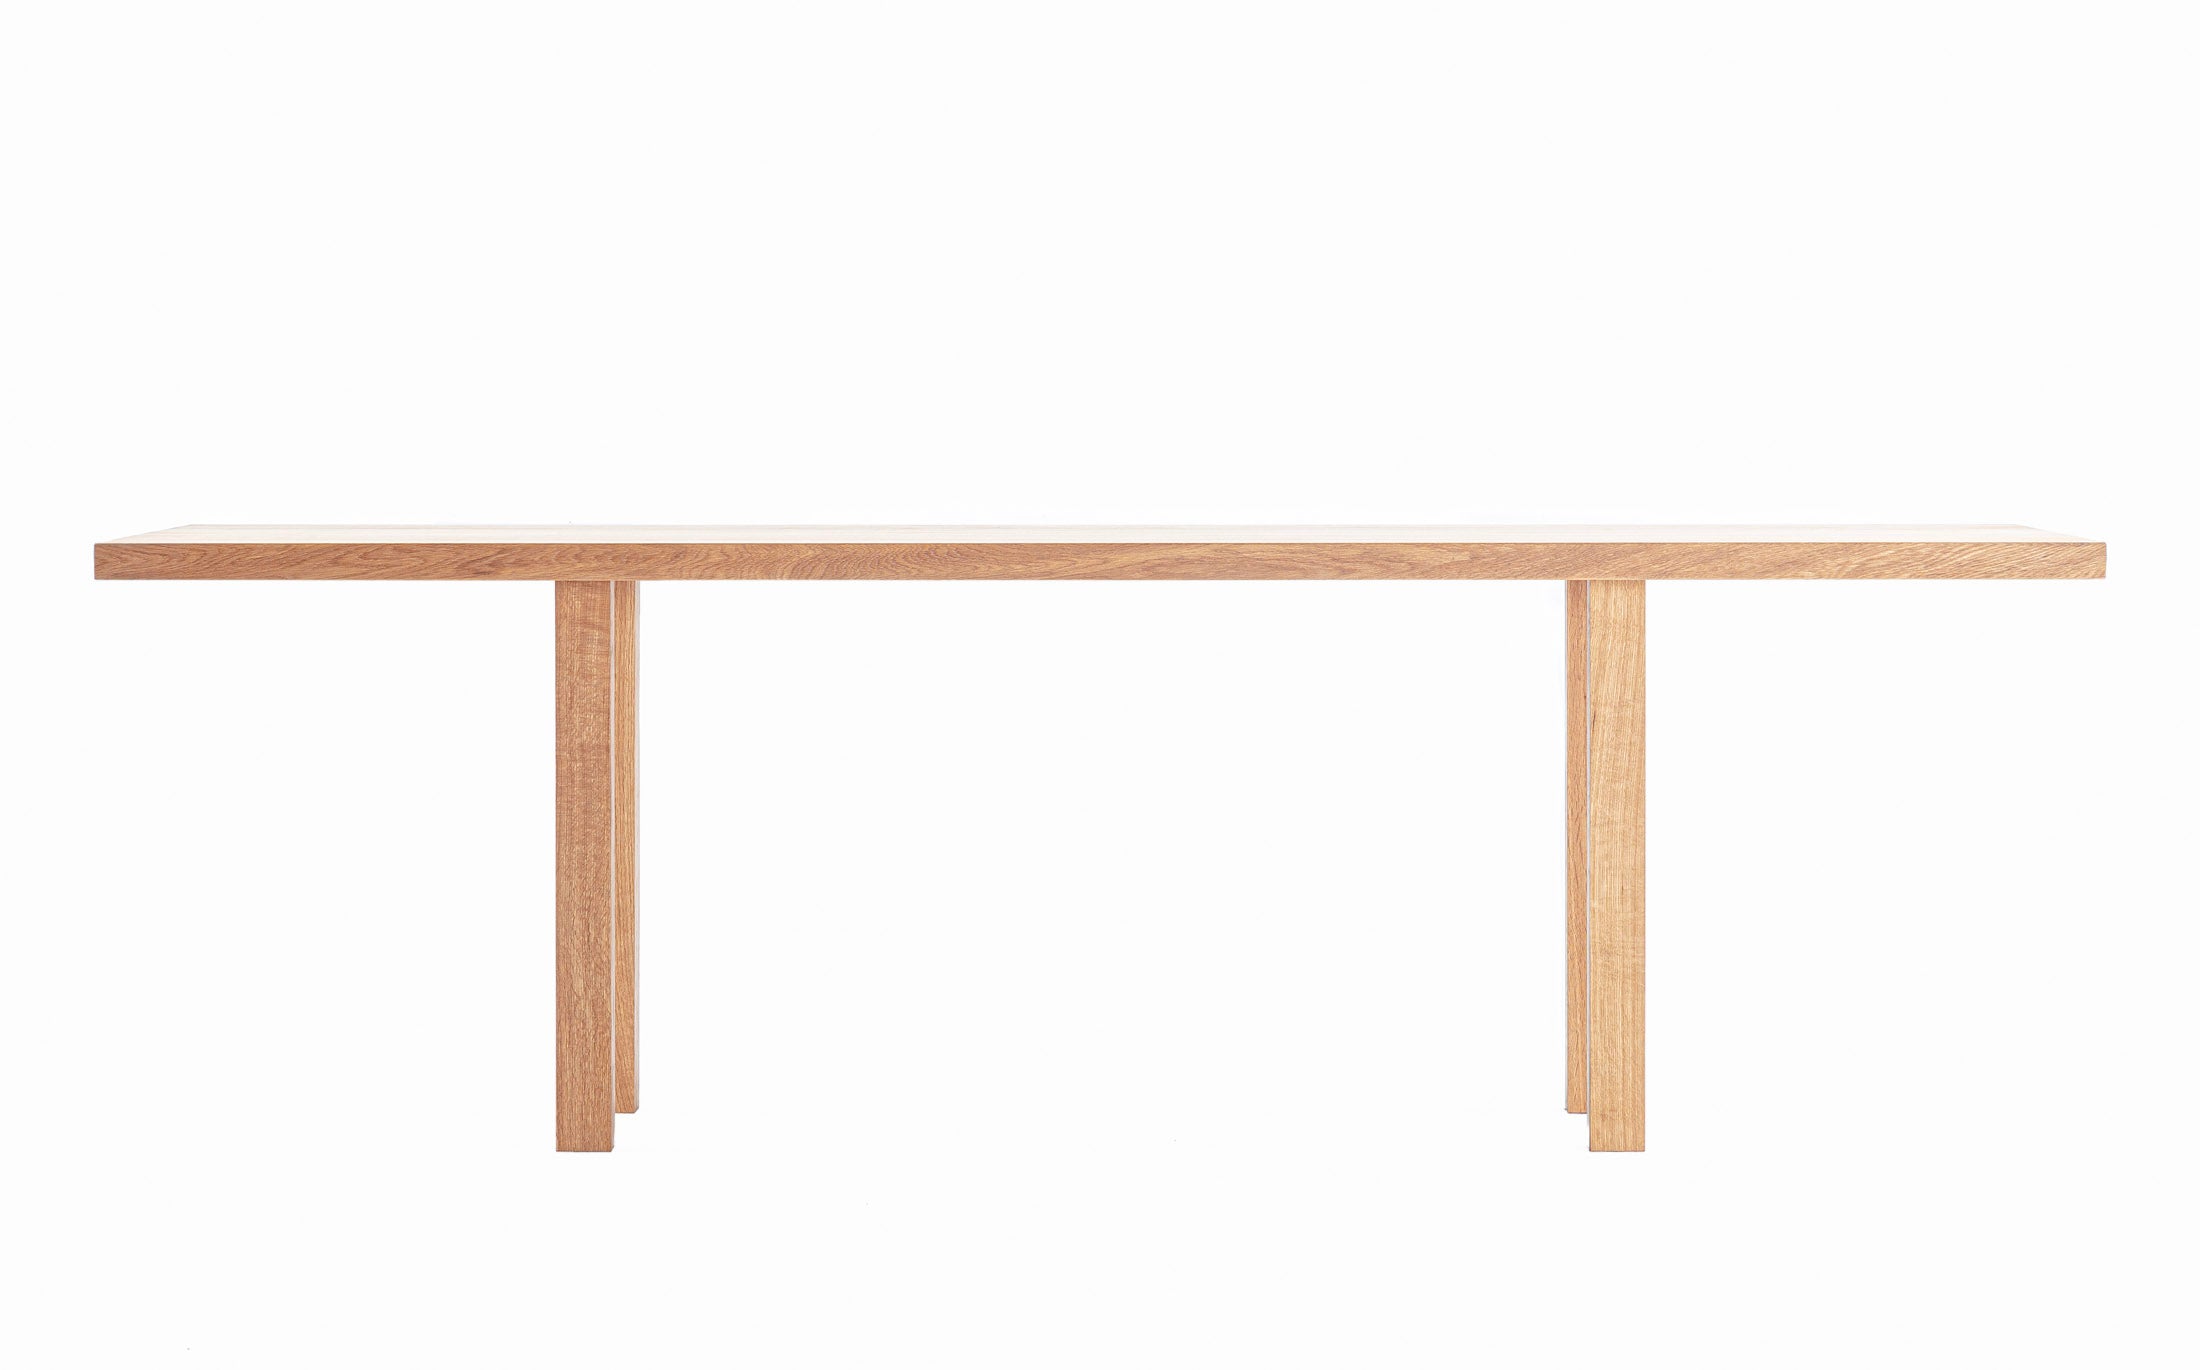 Atelier Zumthor working table - Square legs #Wood Finish_beeswax